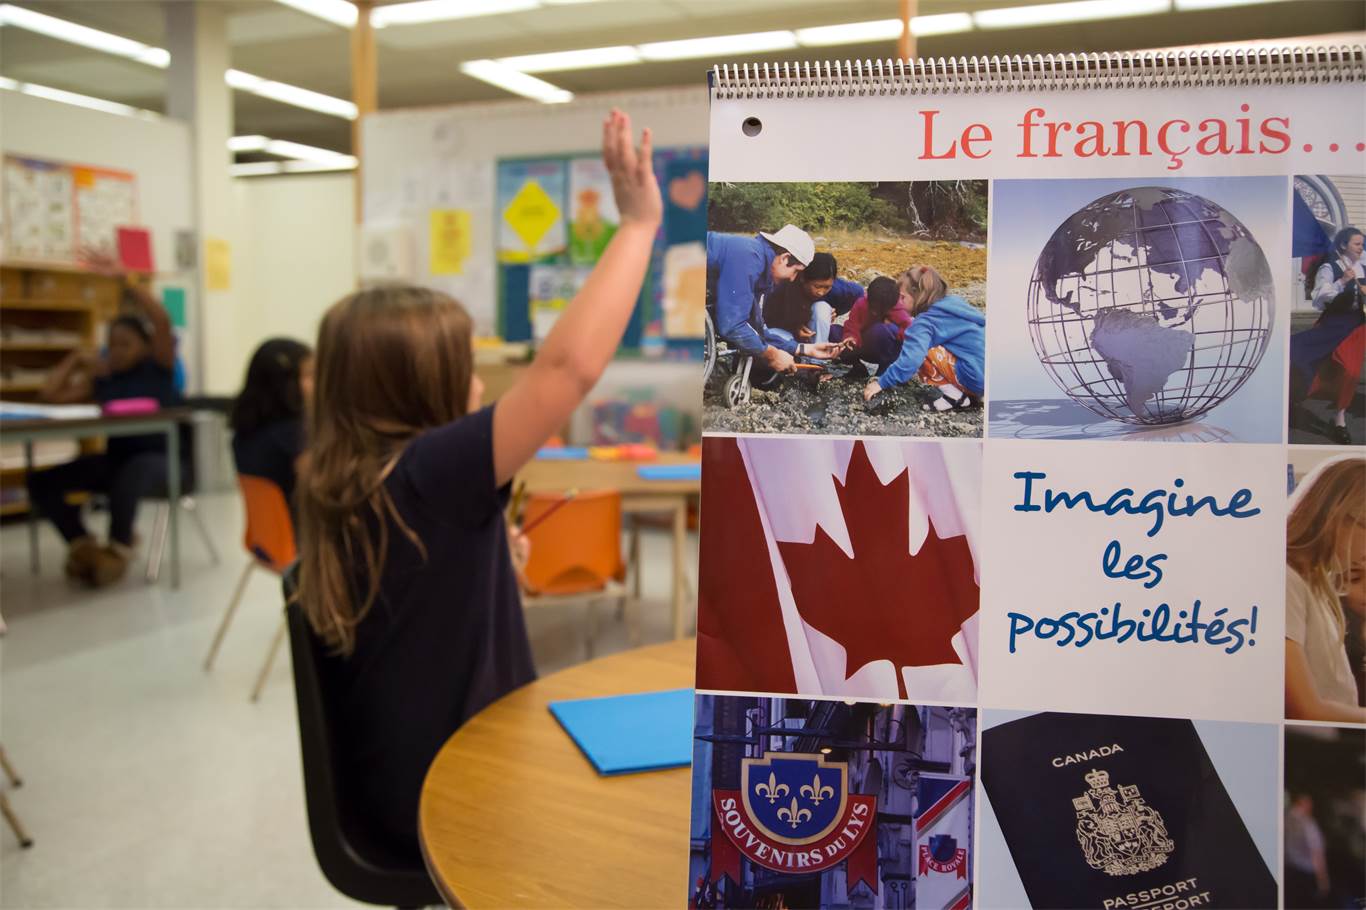 Overview of the Early French Immersion Program